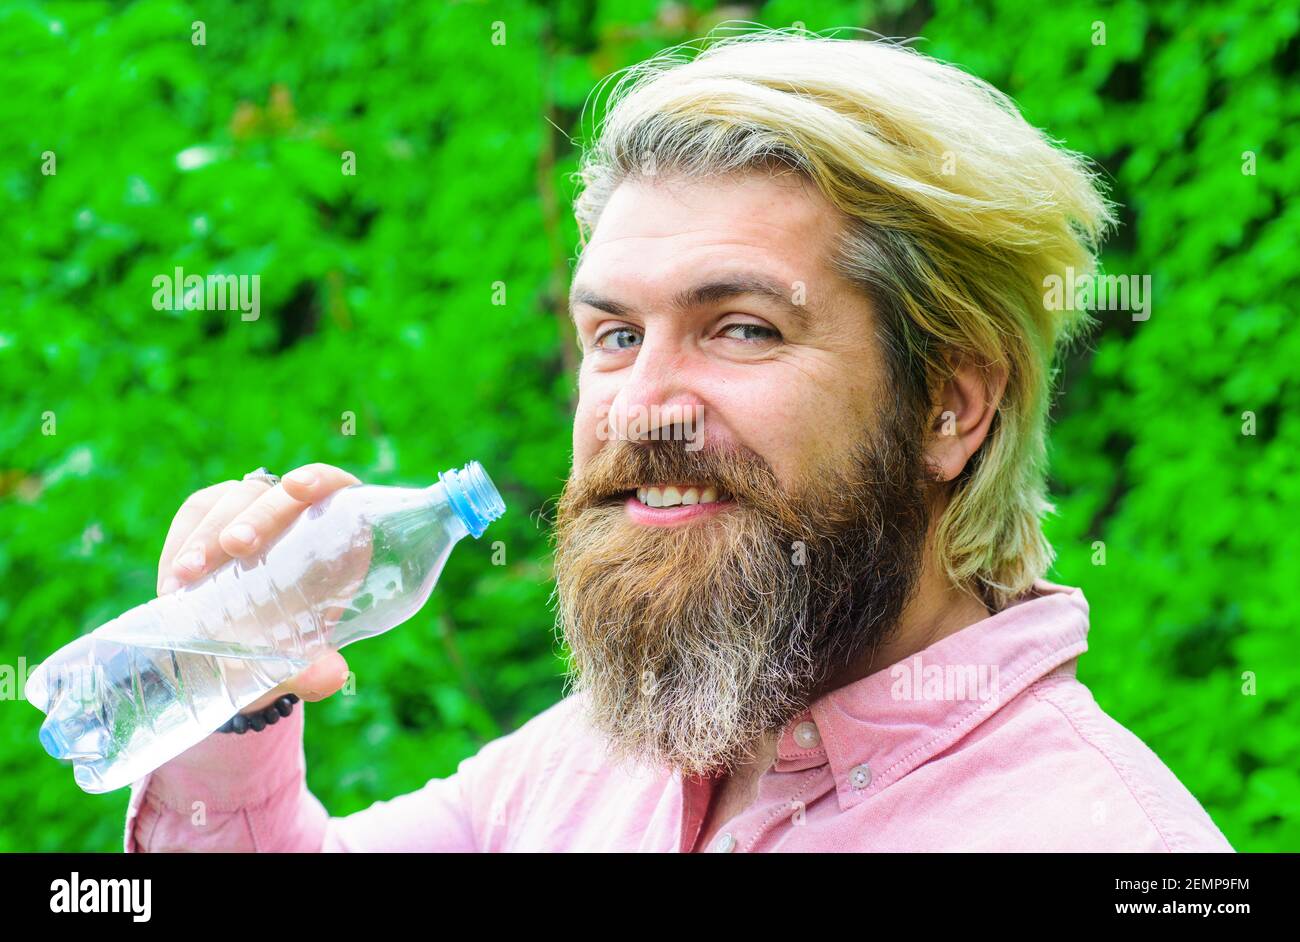 Bearded man drinking water. Male with bottle. Healthy lifestyle. Drinks water. Hydration concept. Stay hydrated. Stock Photo